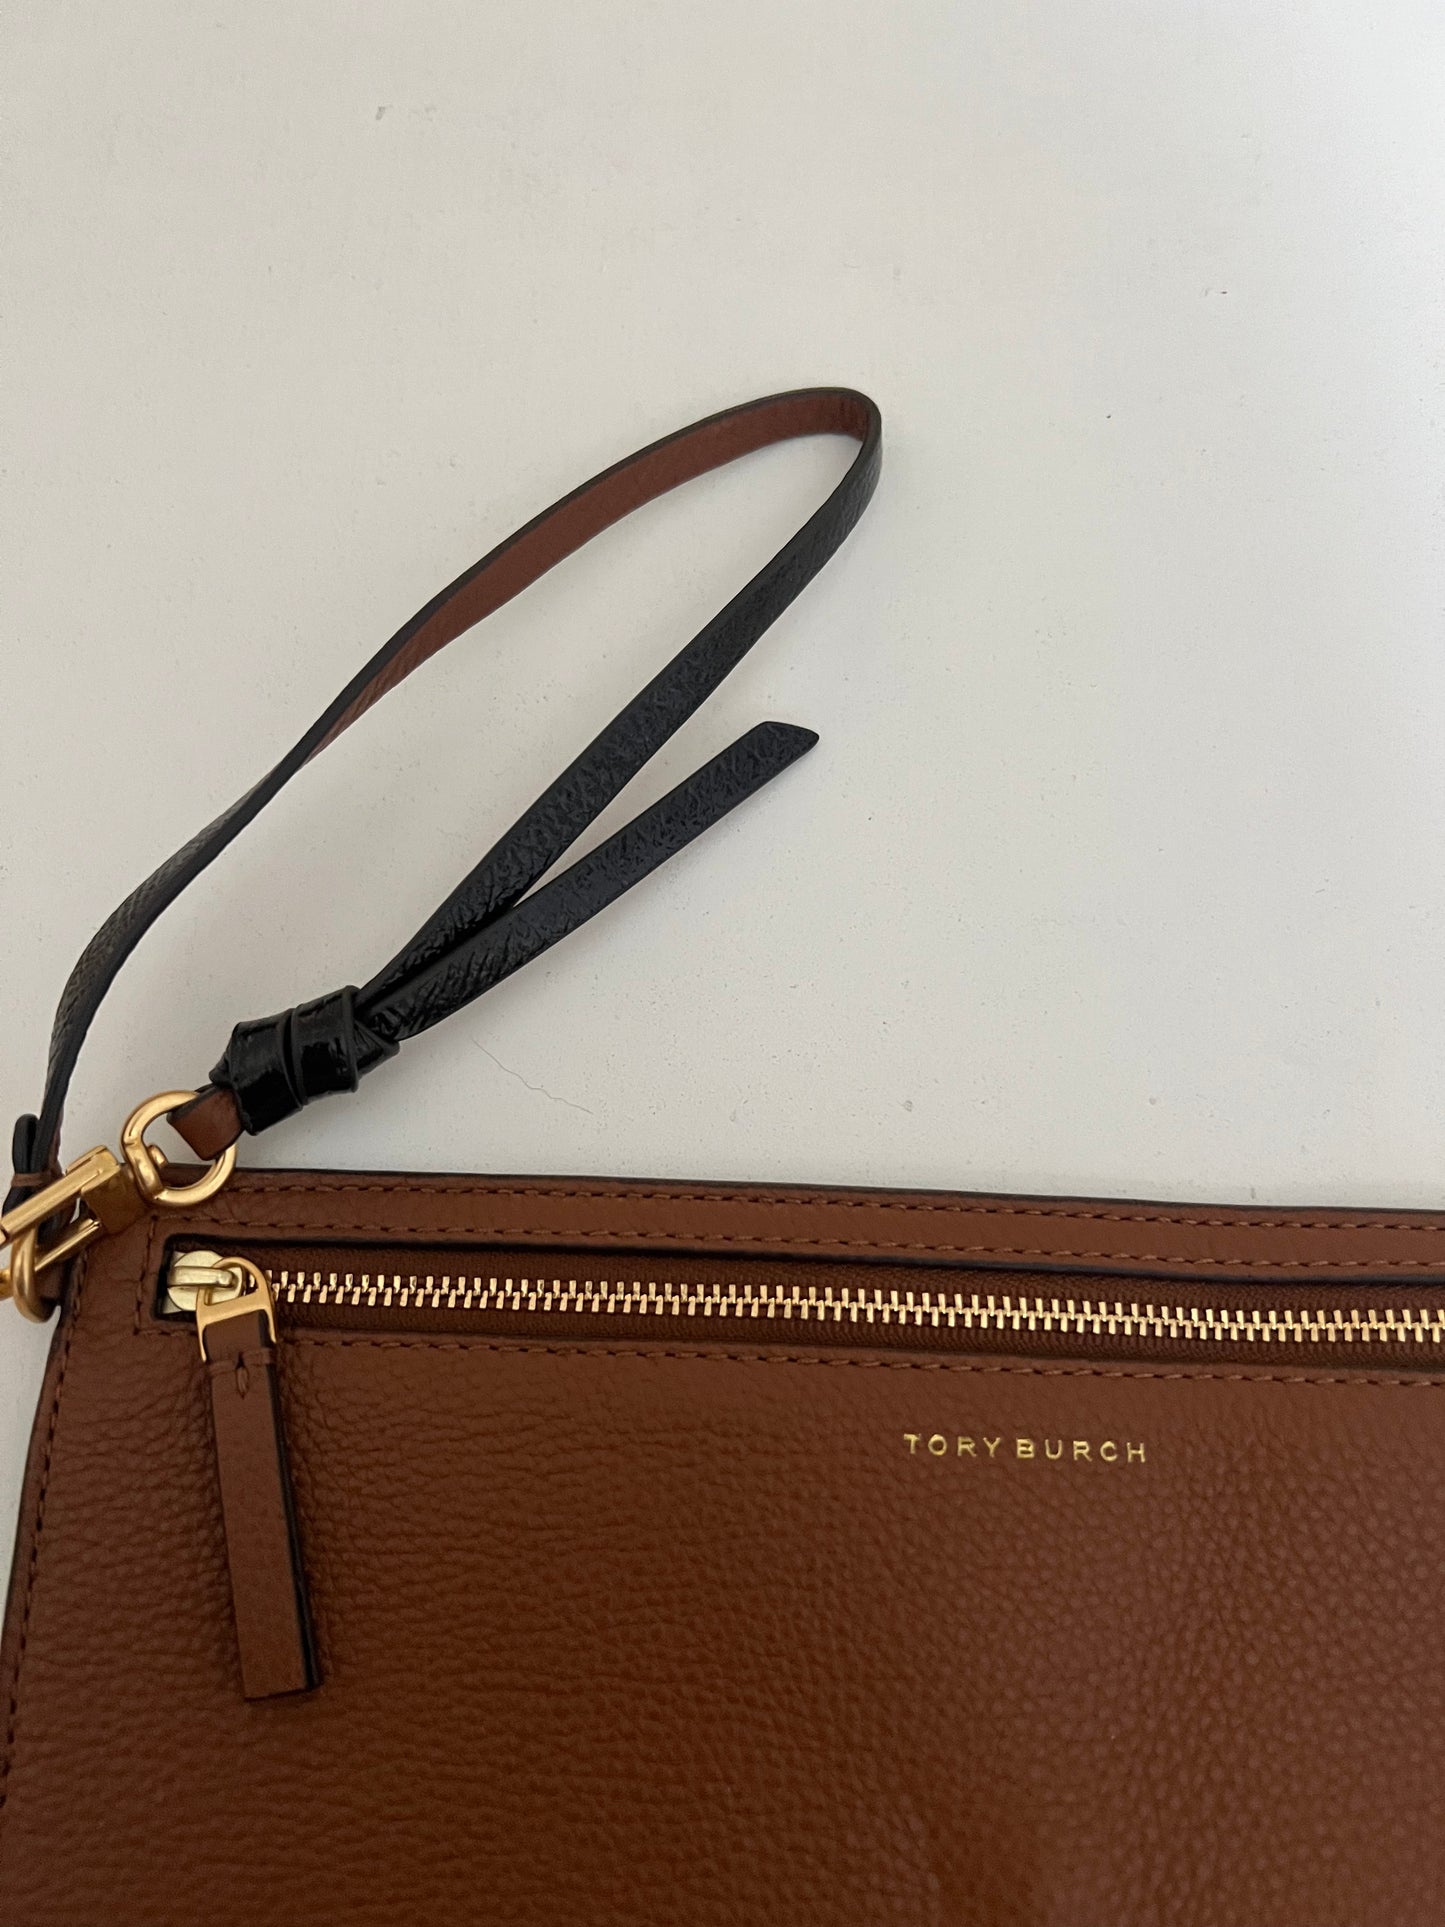 Tory Burch Brown Leather Wristlet